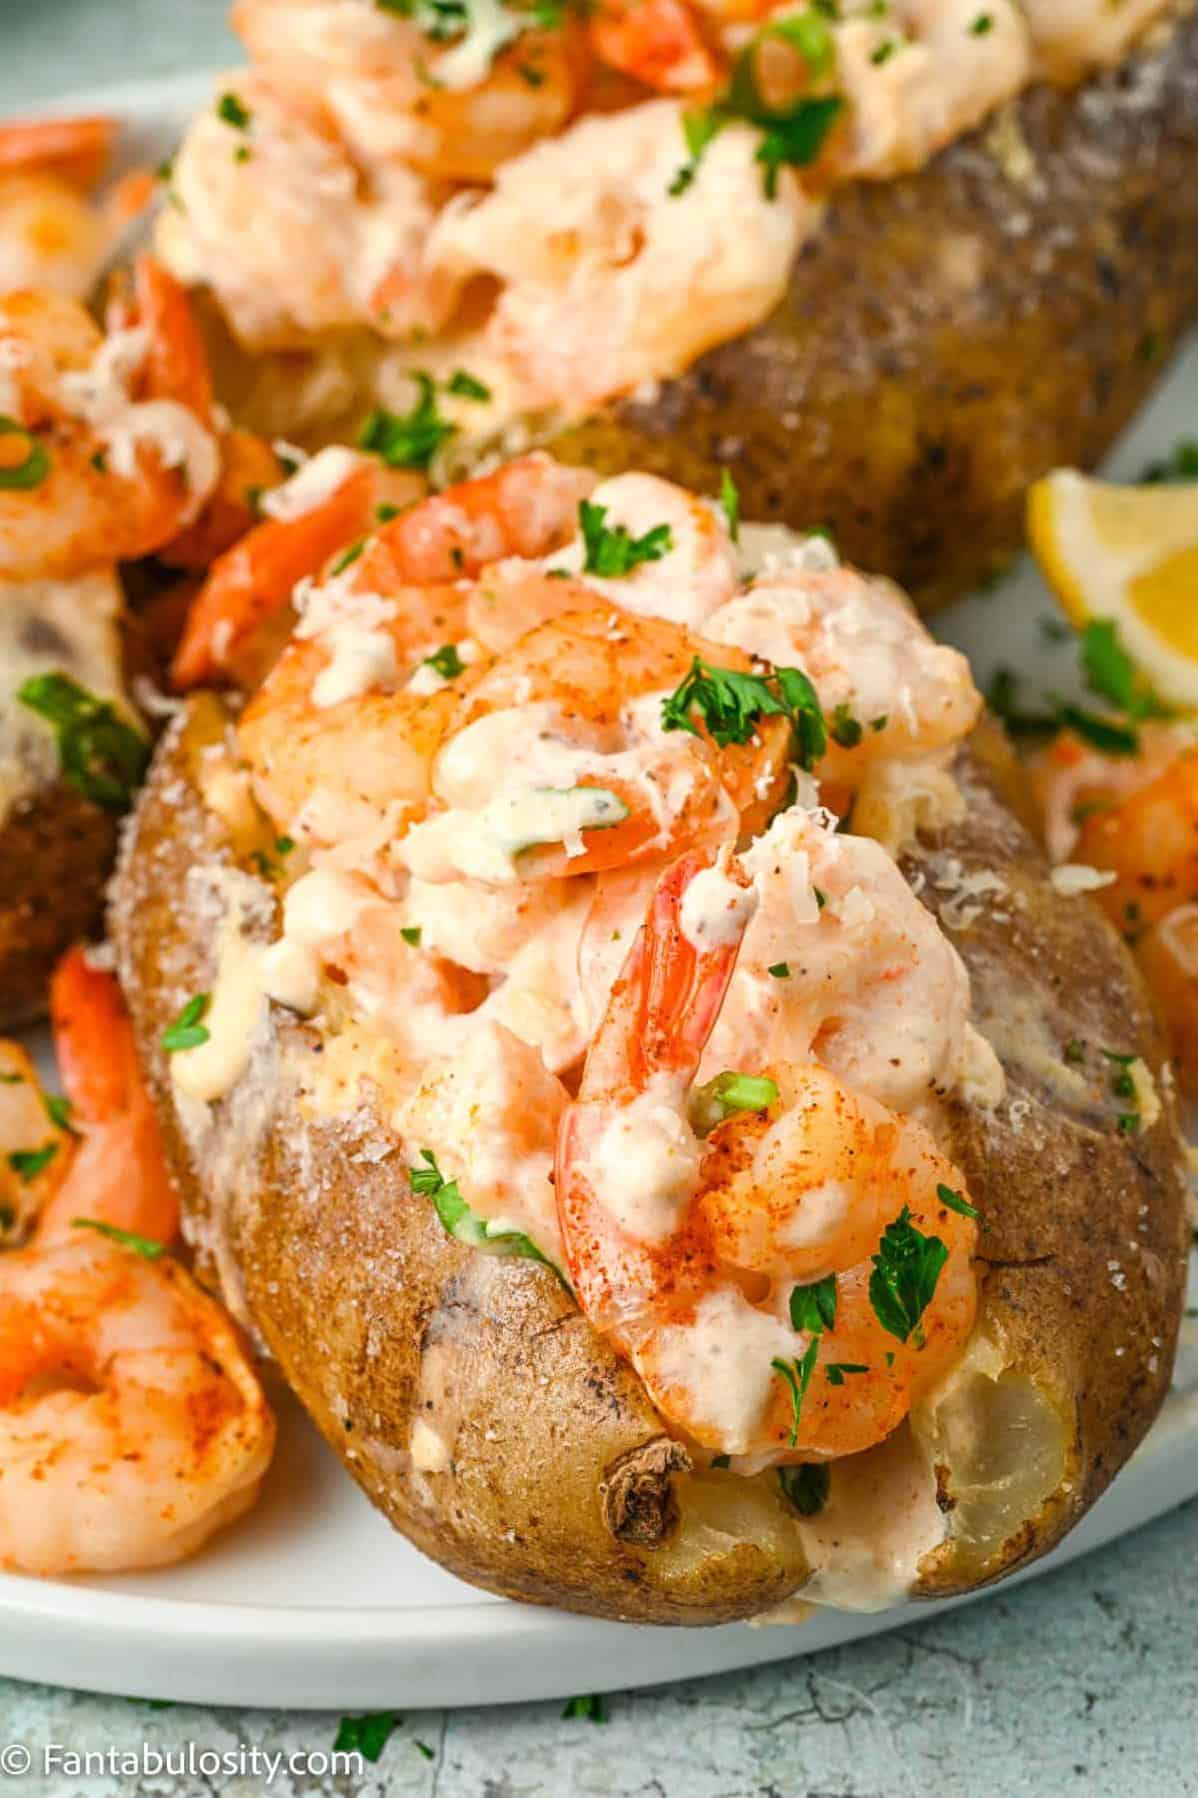  A meal fit for a mermaid - our seafood stuffed baked potato will make your taste buds swim!